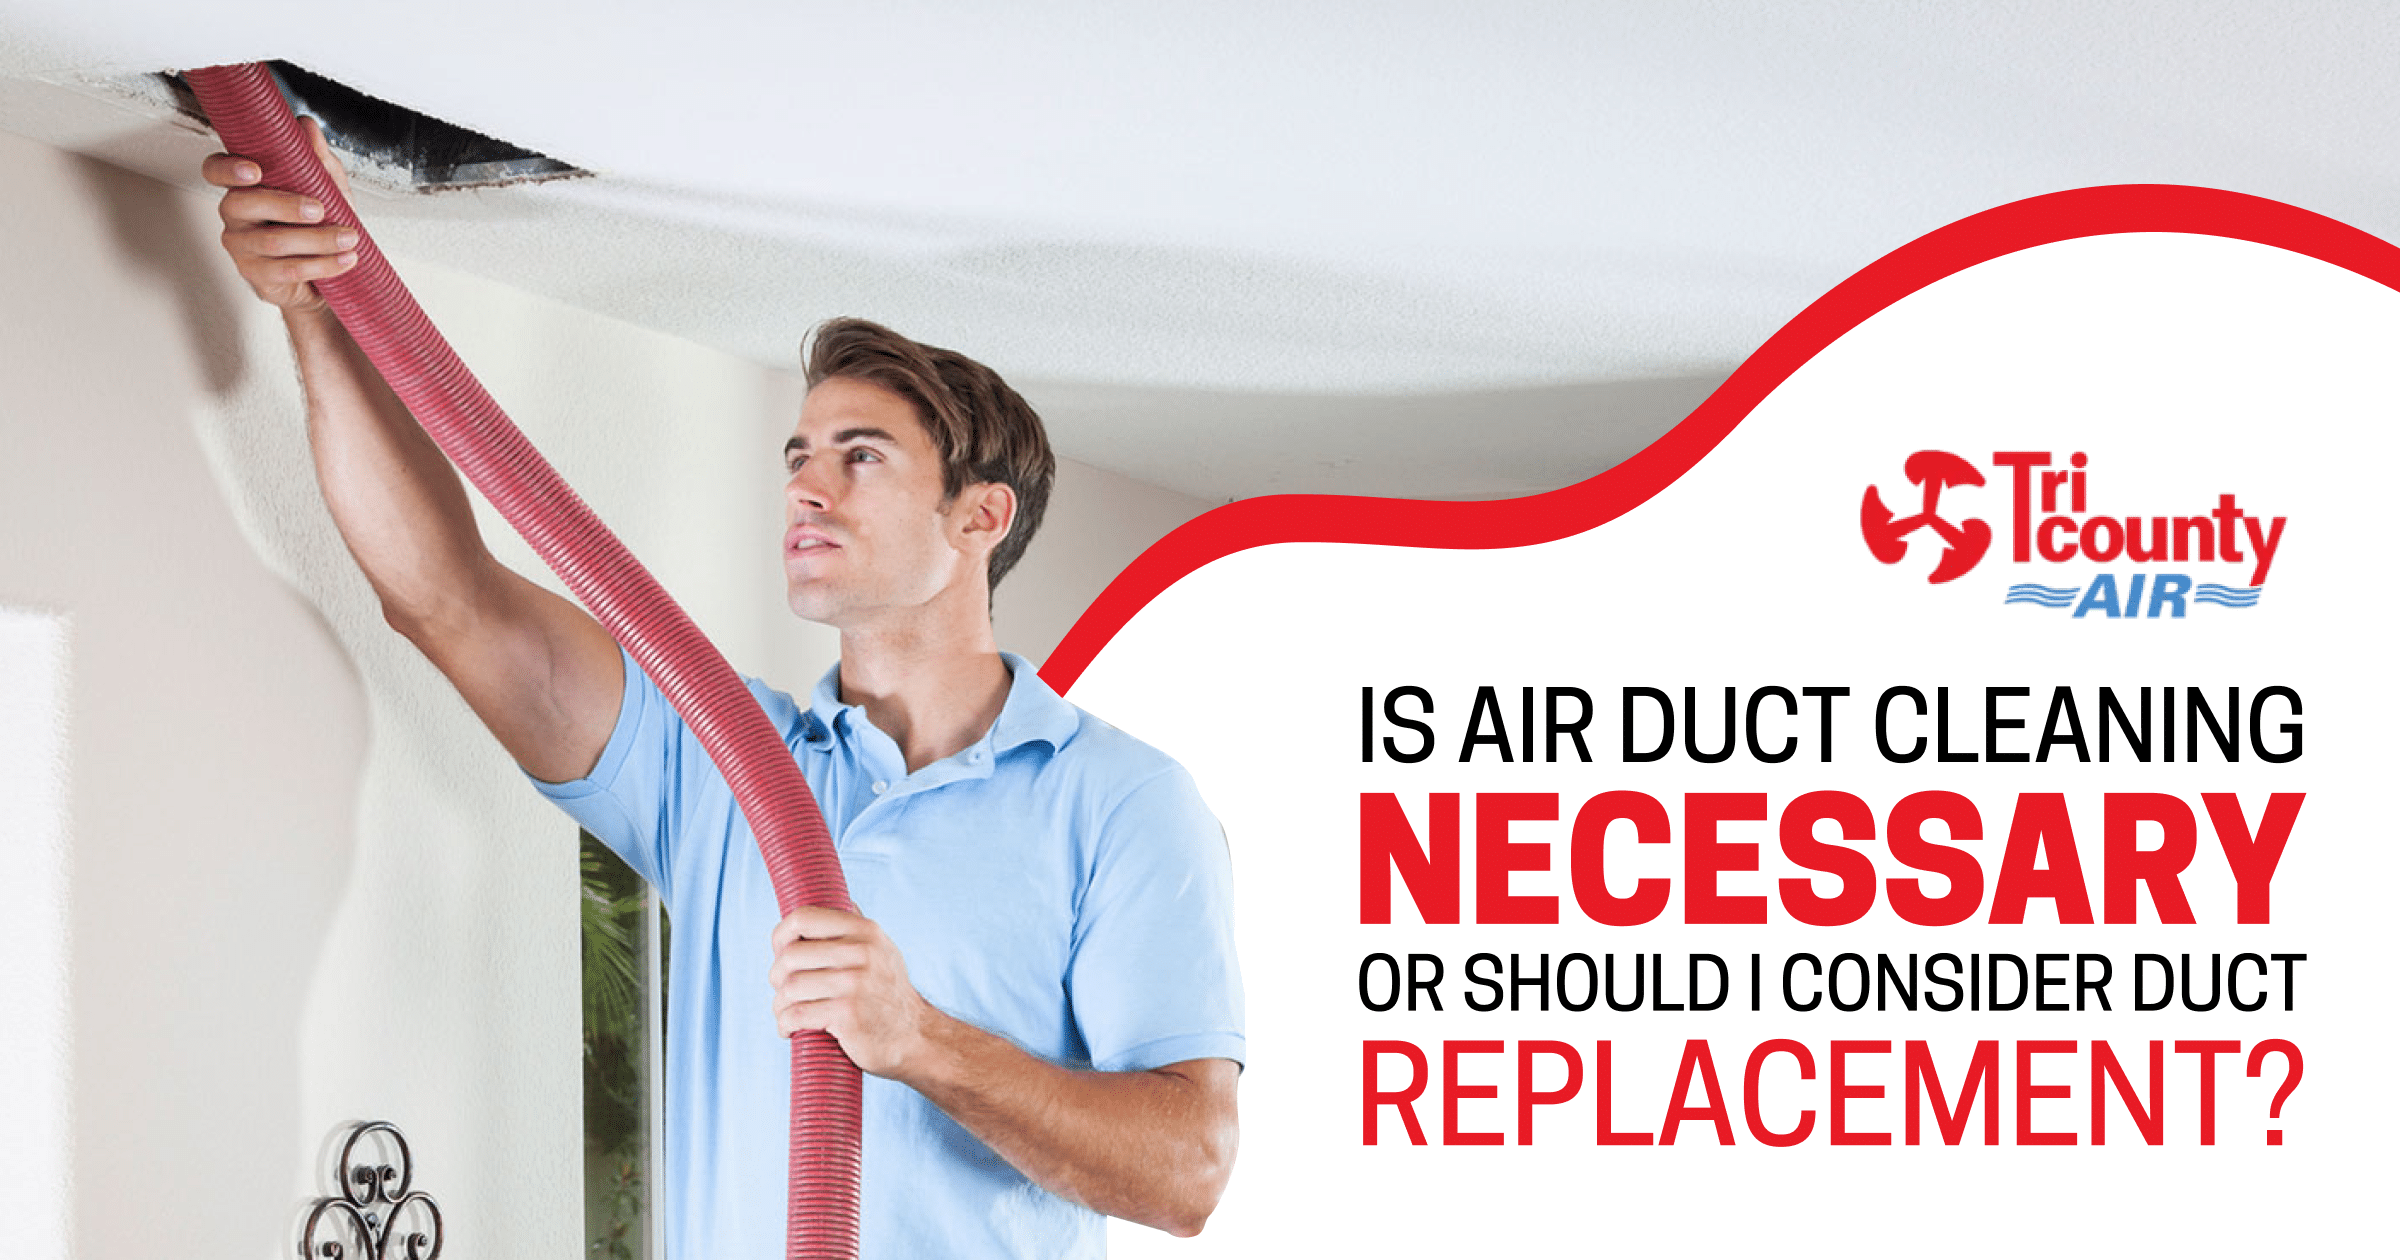 Is Air Duct Cleaning Necessary or Should I Consider Duct Replacement?